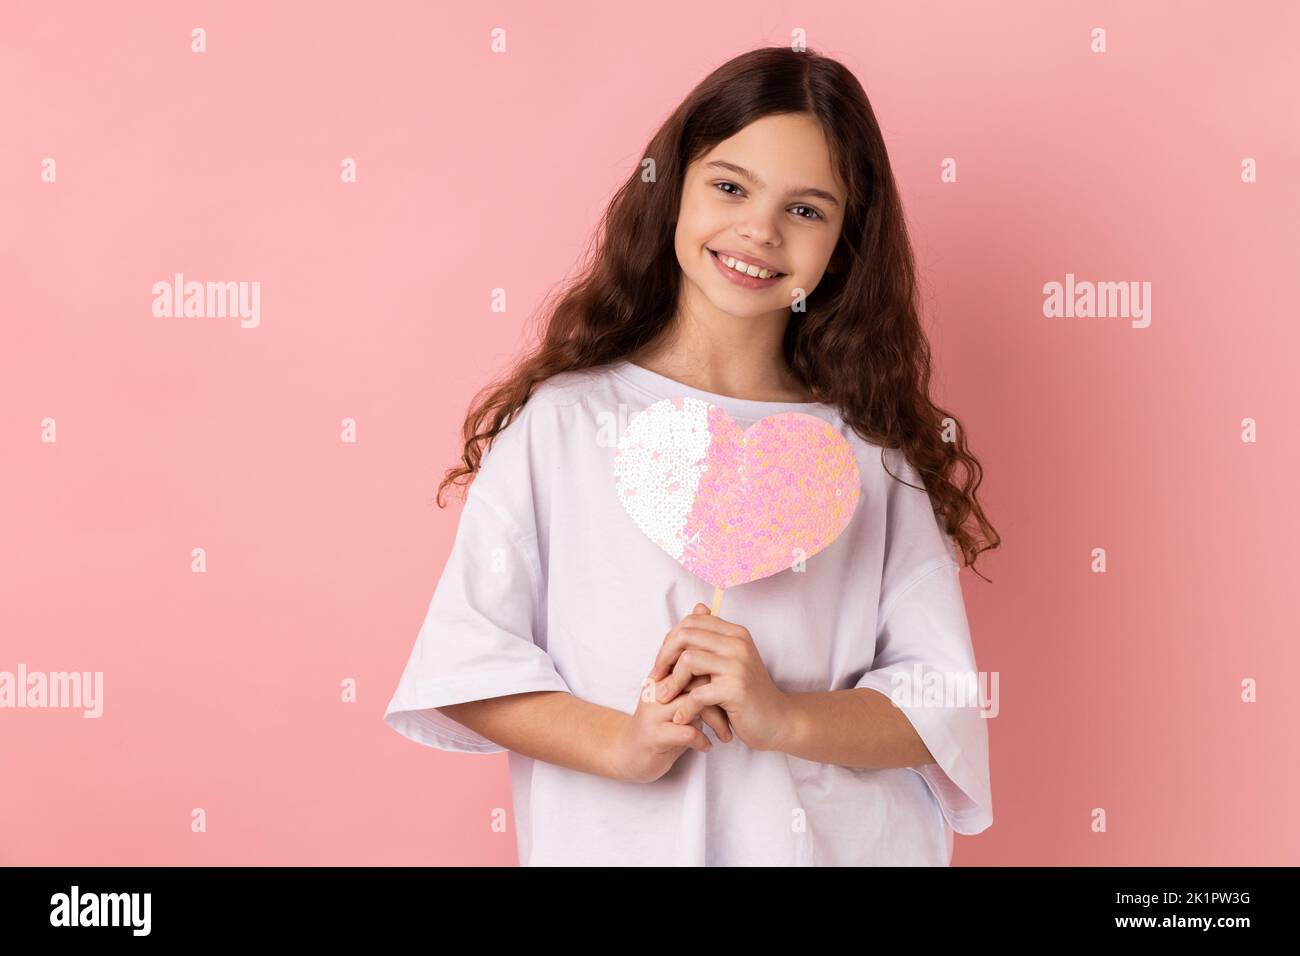 Portrait of happy satisfied little girl wearing white T-shirt holding paper pink heart on stick and smiling to camera, sharing love. Indoor studio shot isolated on pink background. Stock Photo